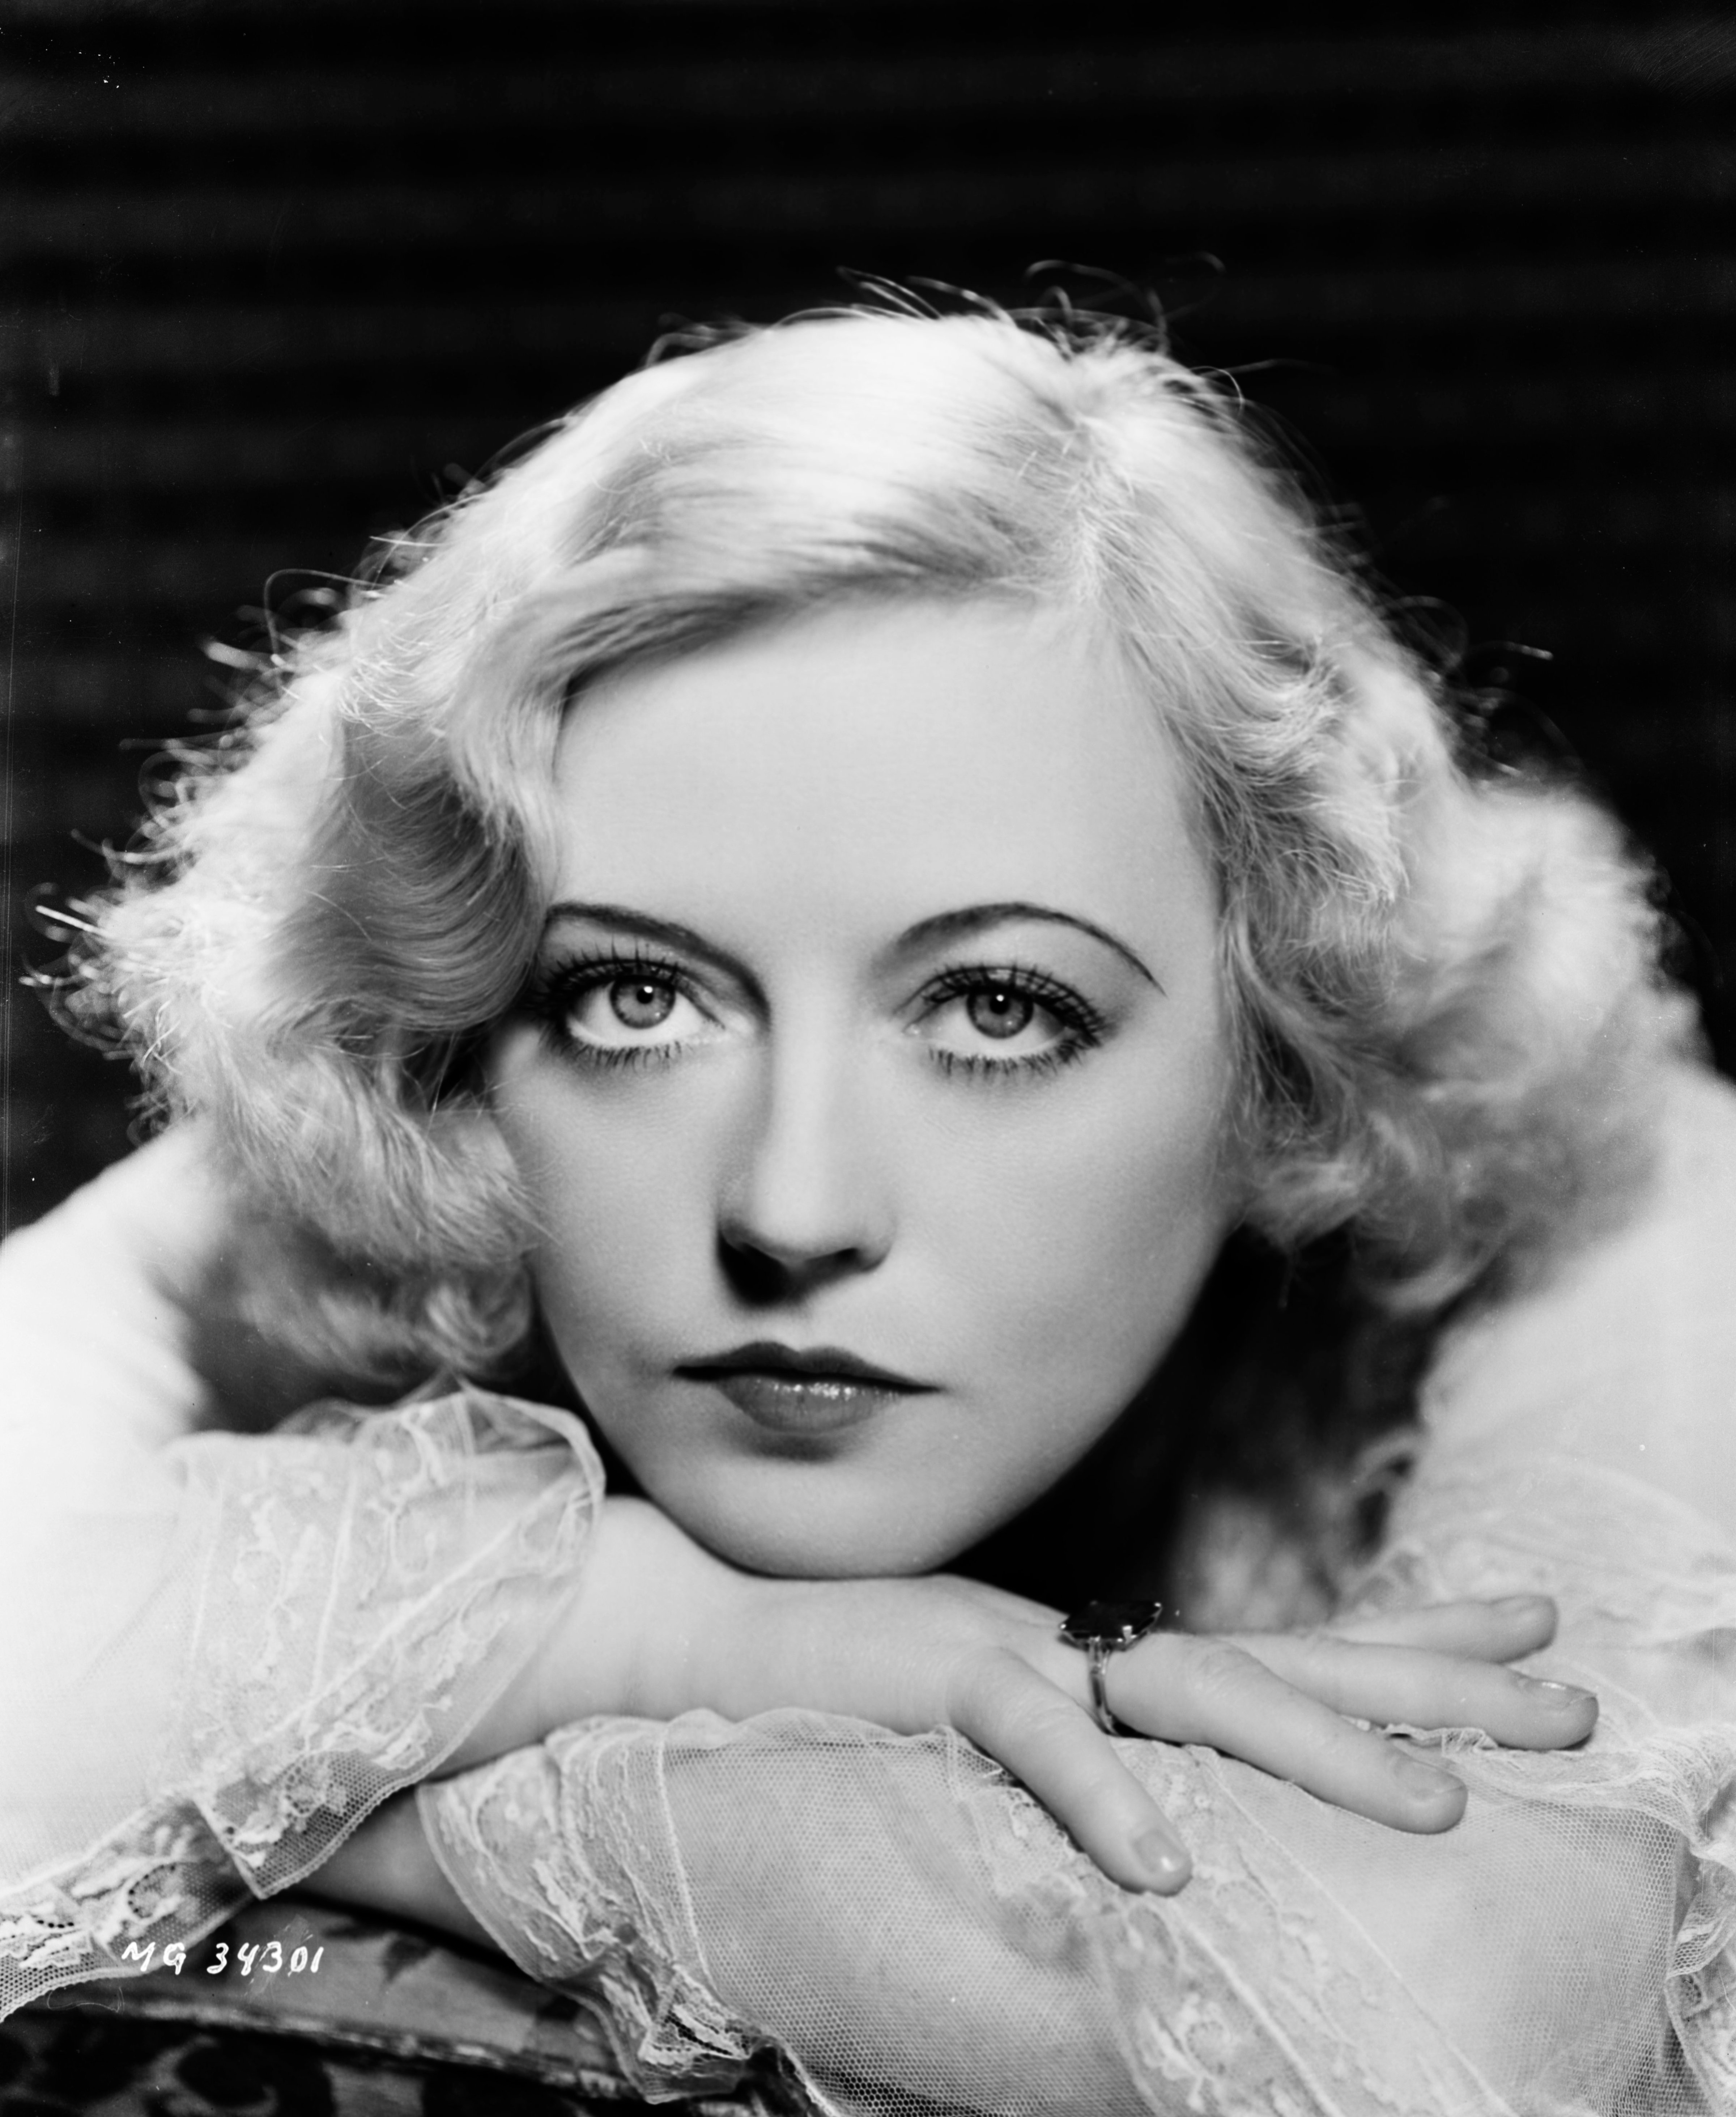 Headshot of actress Marion Davies (1897-1961), for MGM Studios, April 23rd 1932. (Getty Images)